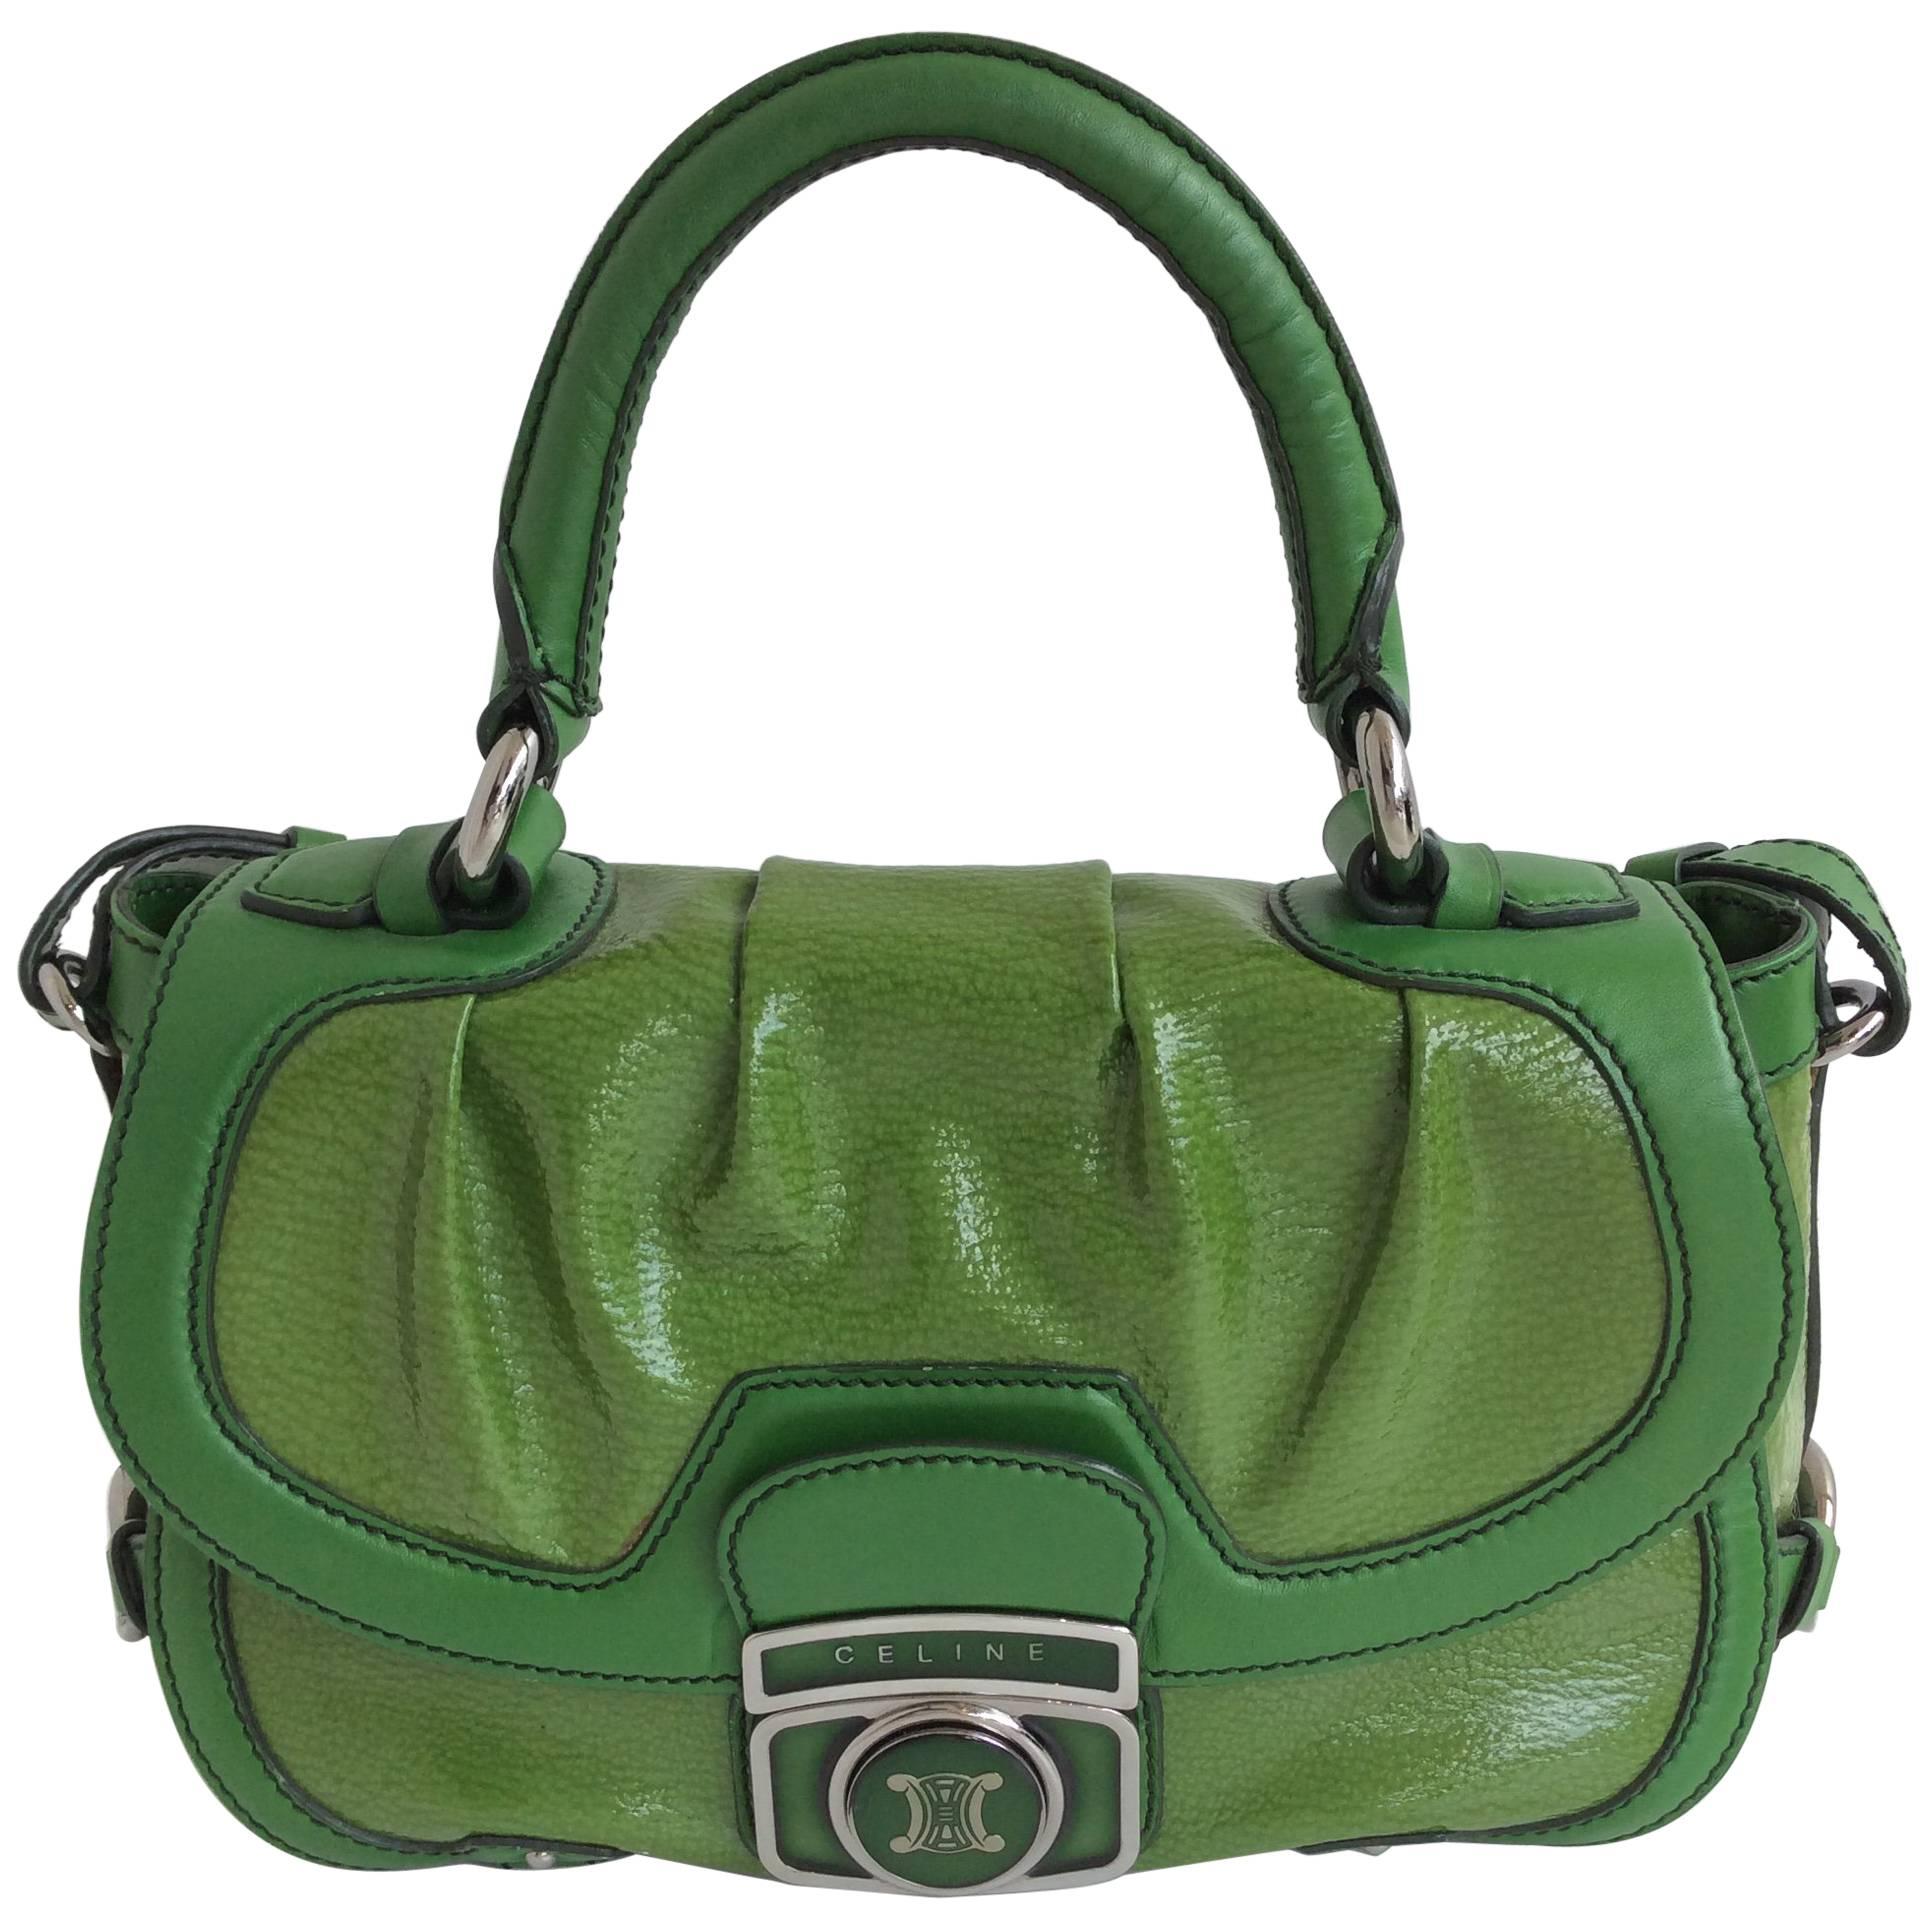 Celine Green Patent Leather Satchel with Shoulder Strap with Silver Hardware For Sale